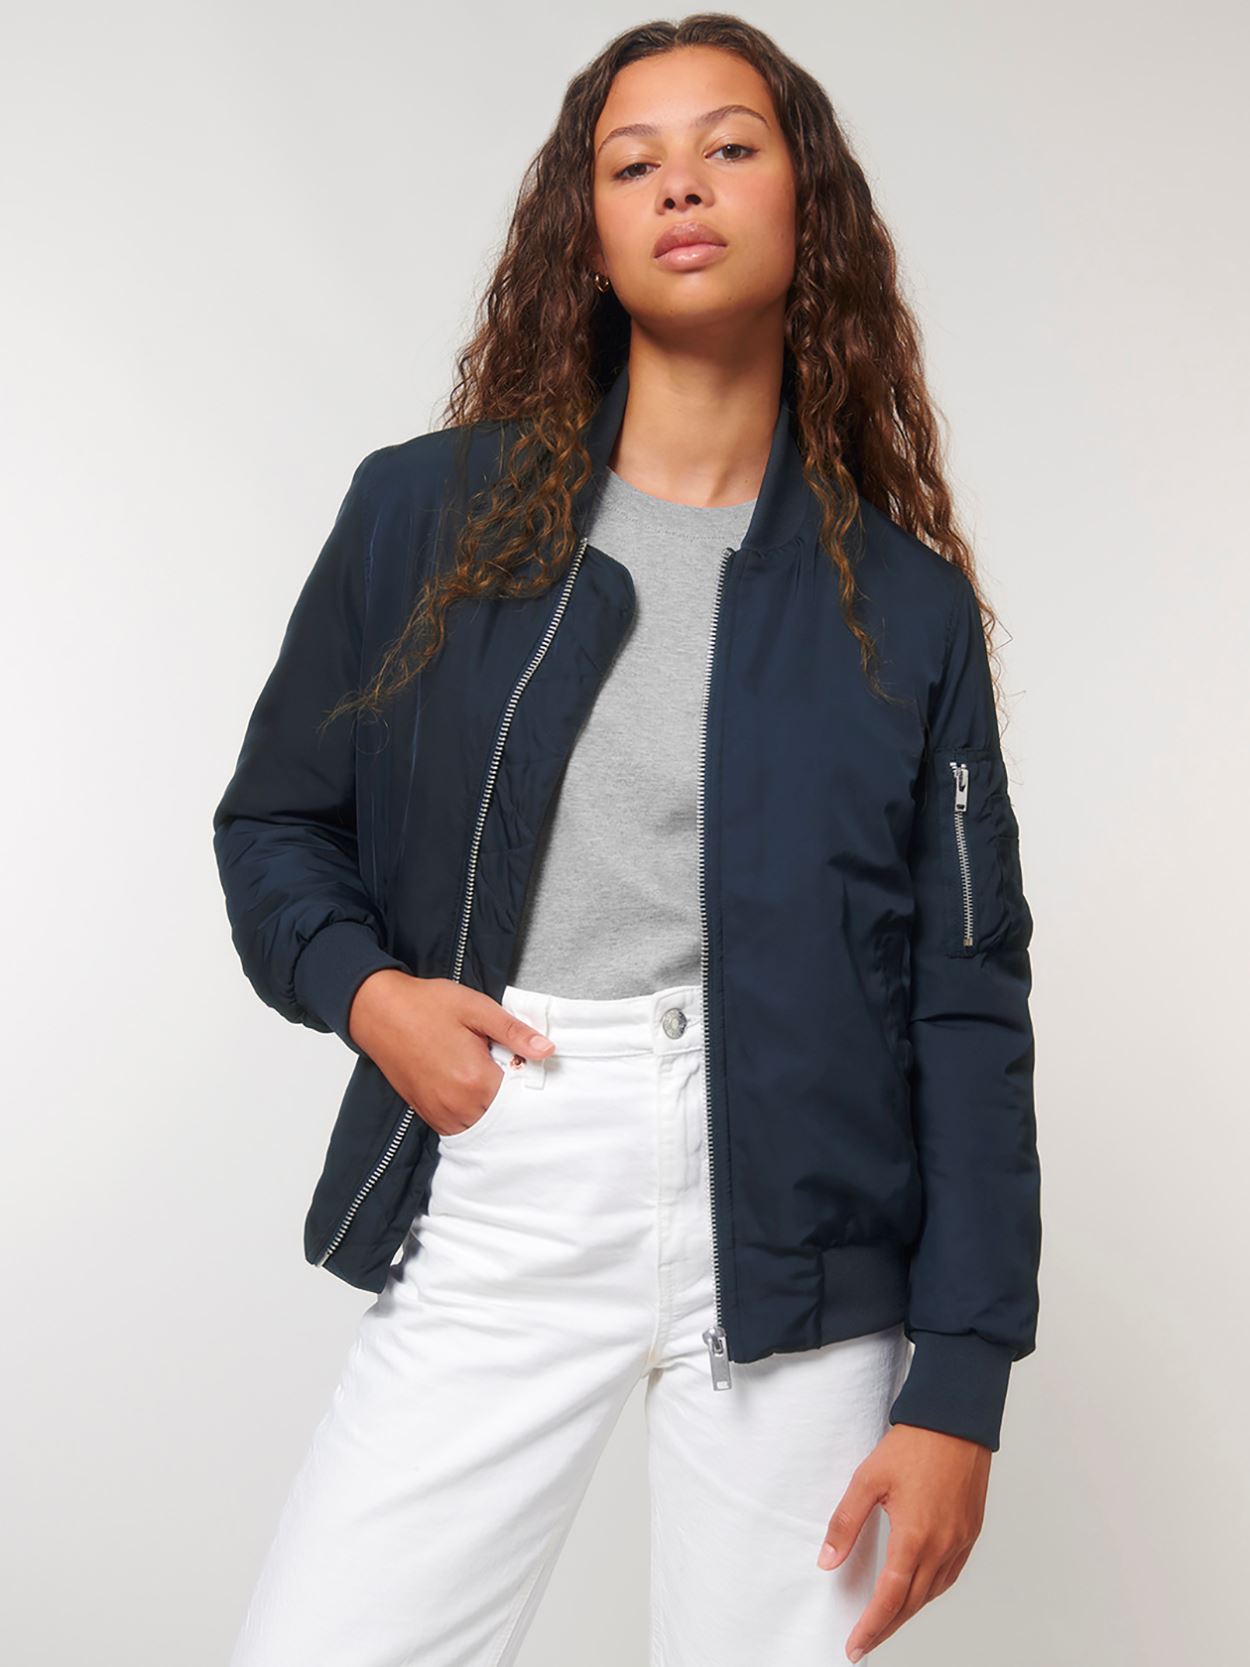 SX178 Bomber Jacket With Metal Details Image 4